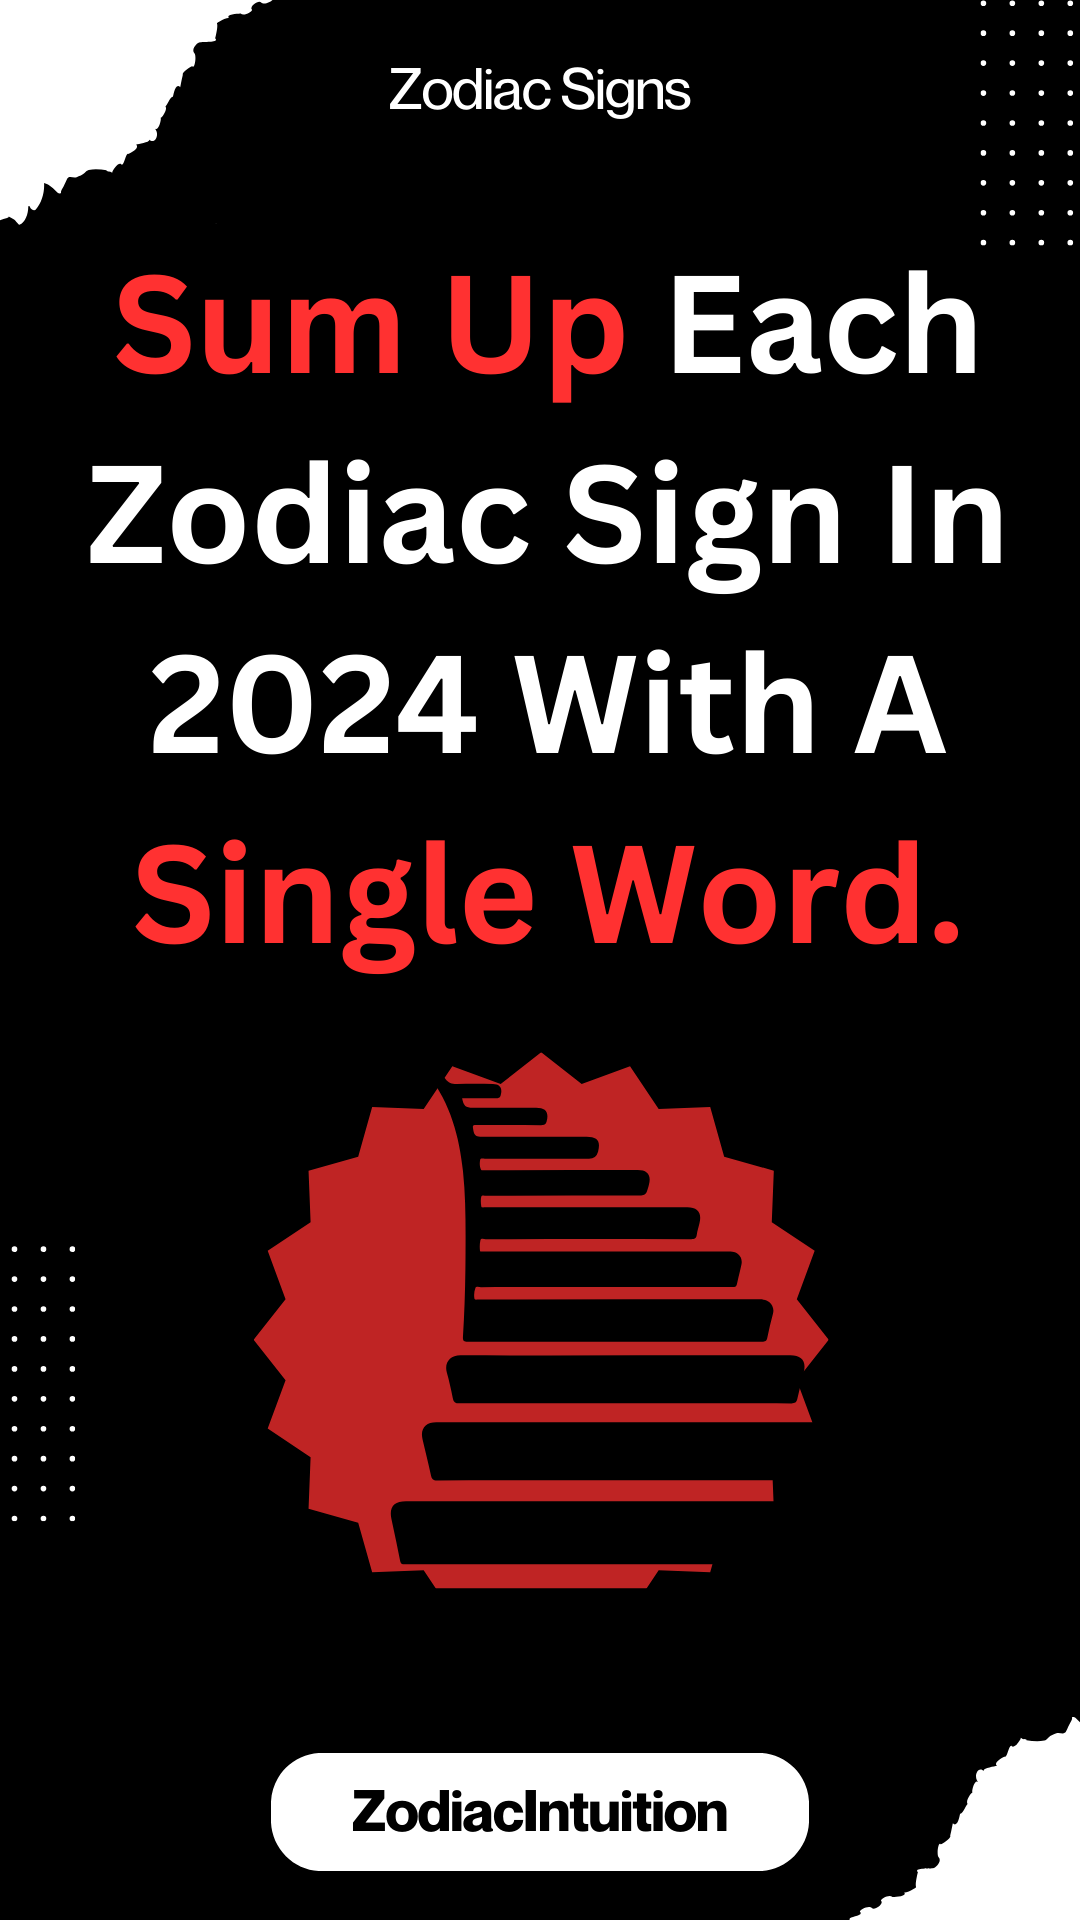 Sum Up Each Zodiac Sign In 2024 With A Single Word.